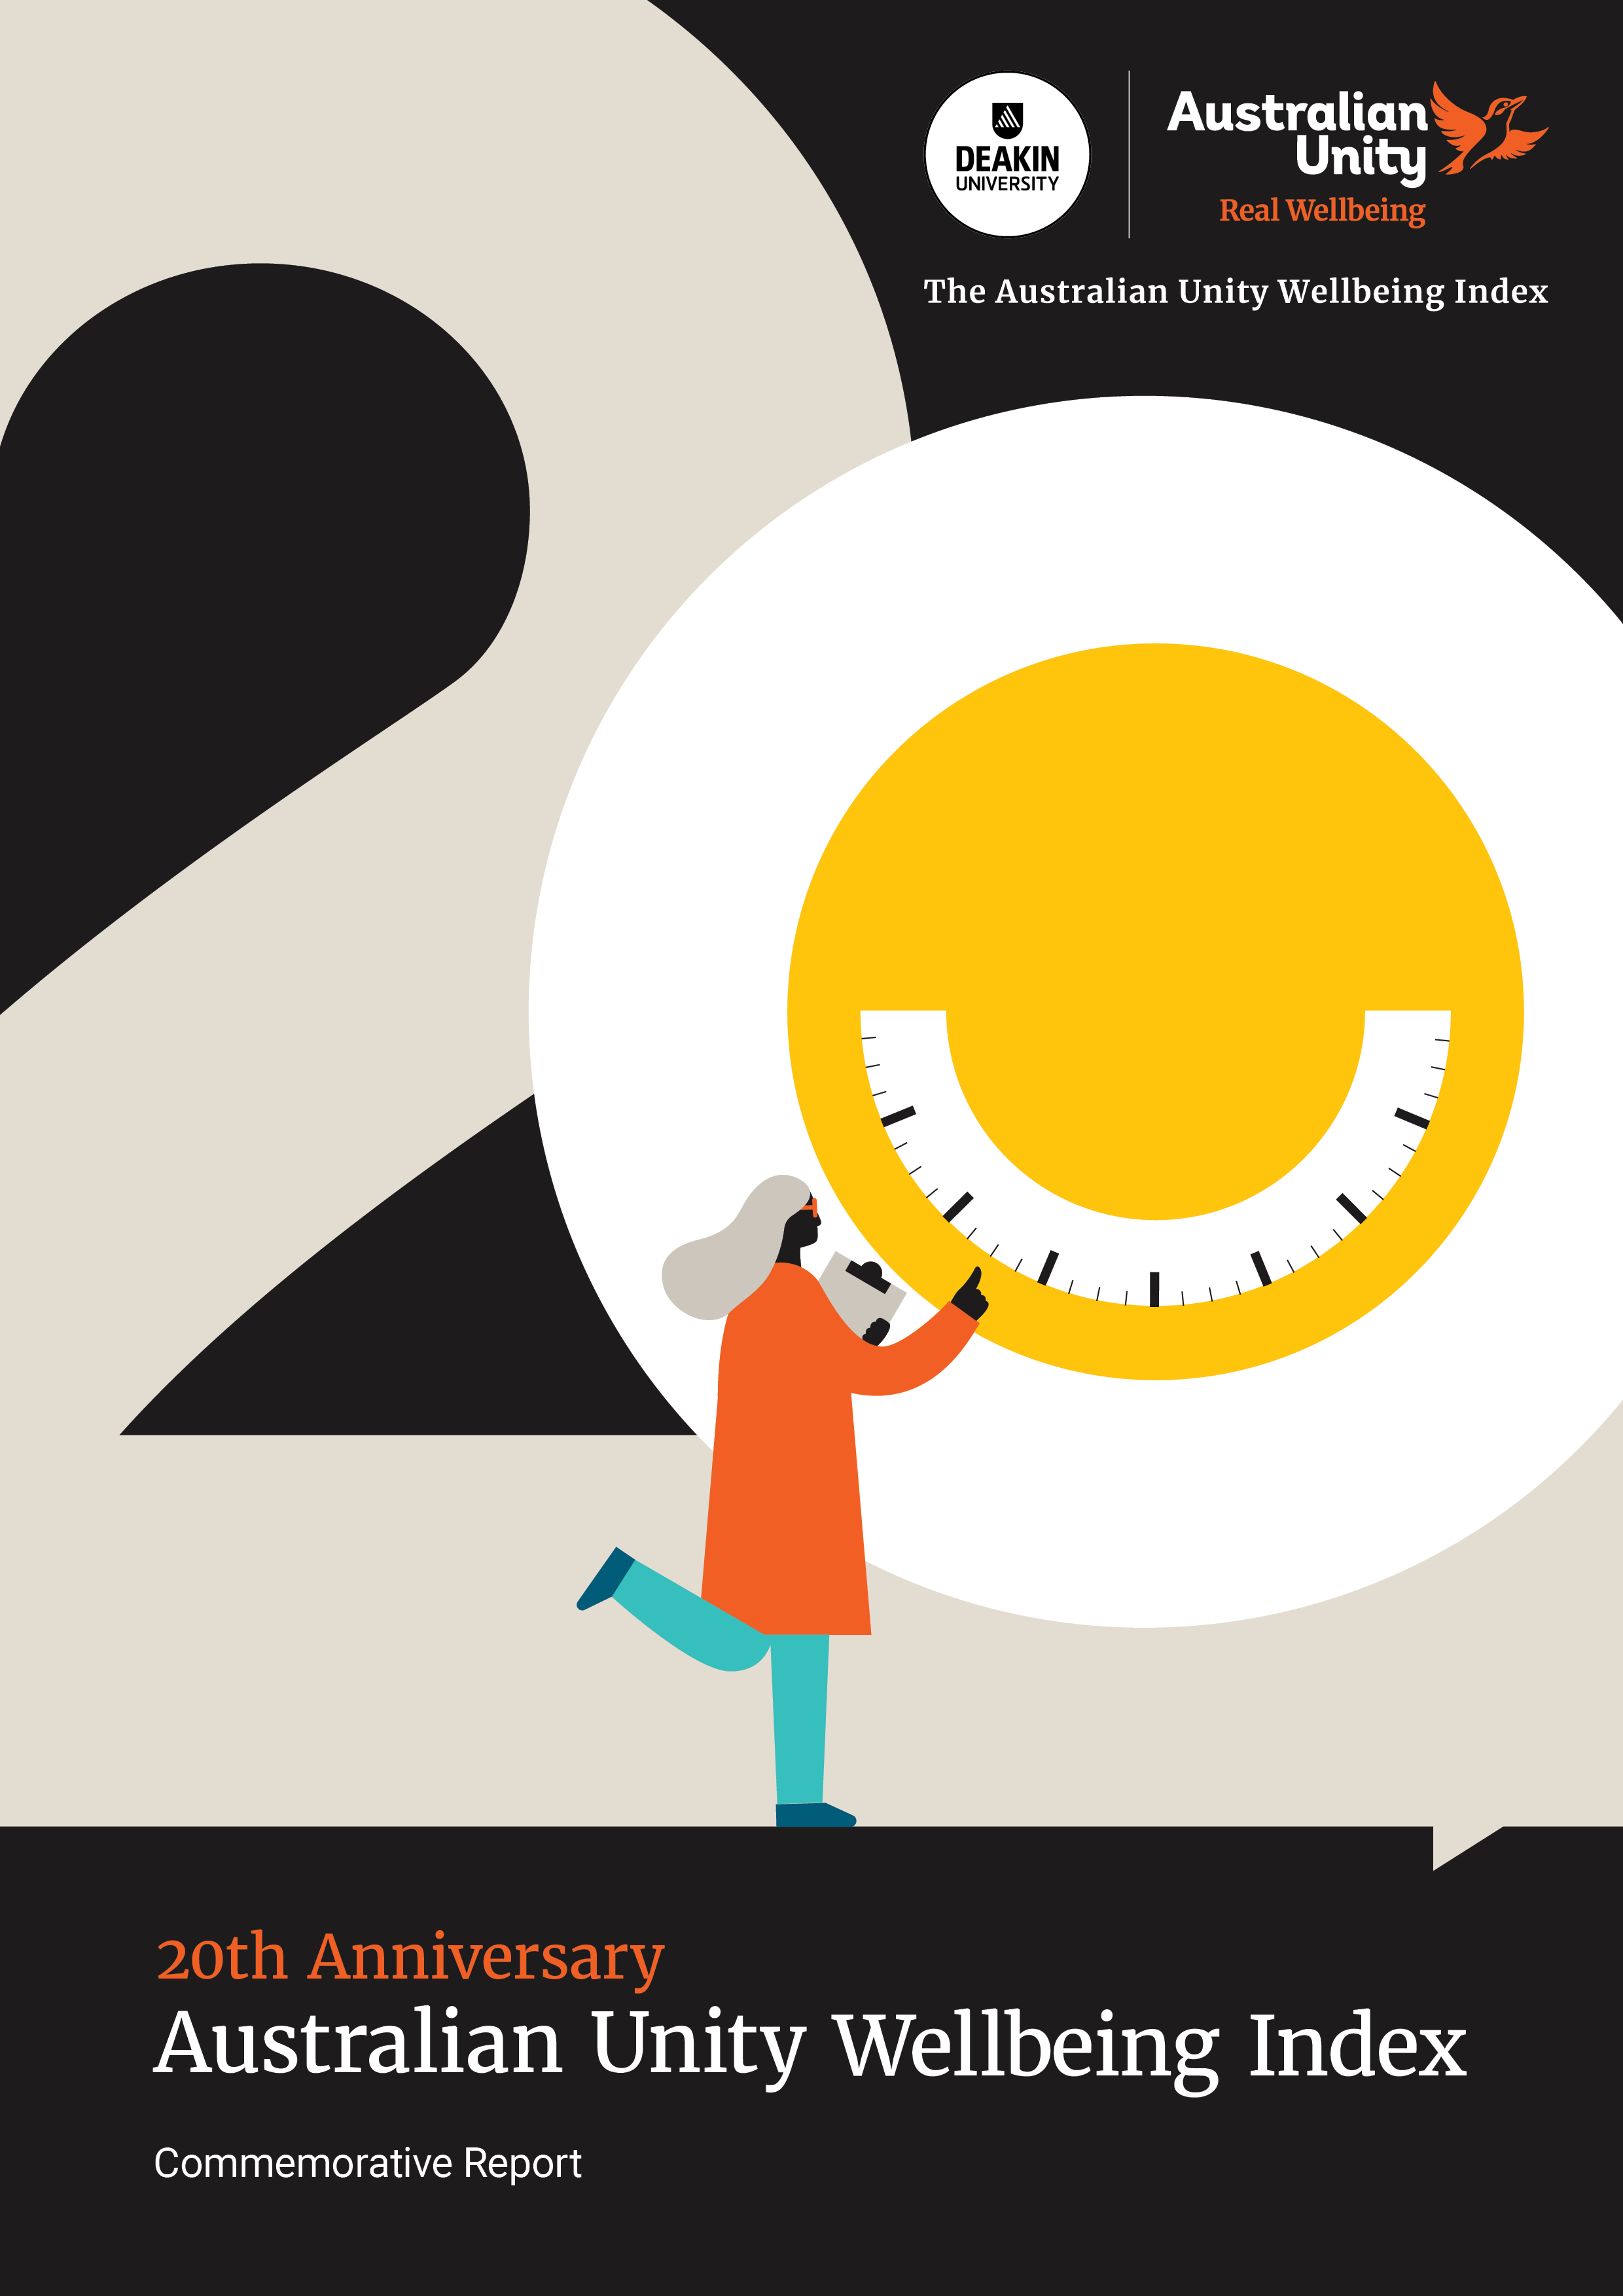 Download the 20th Anniversary Australian Unity Wellbeing Index report